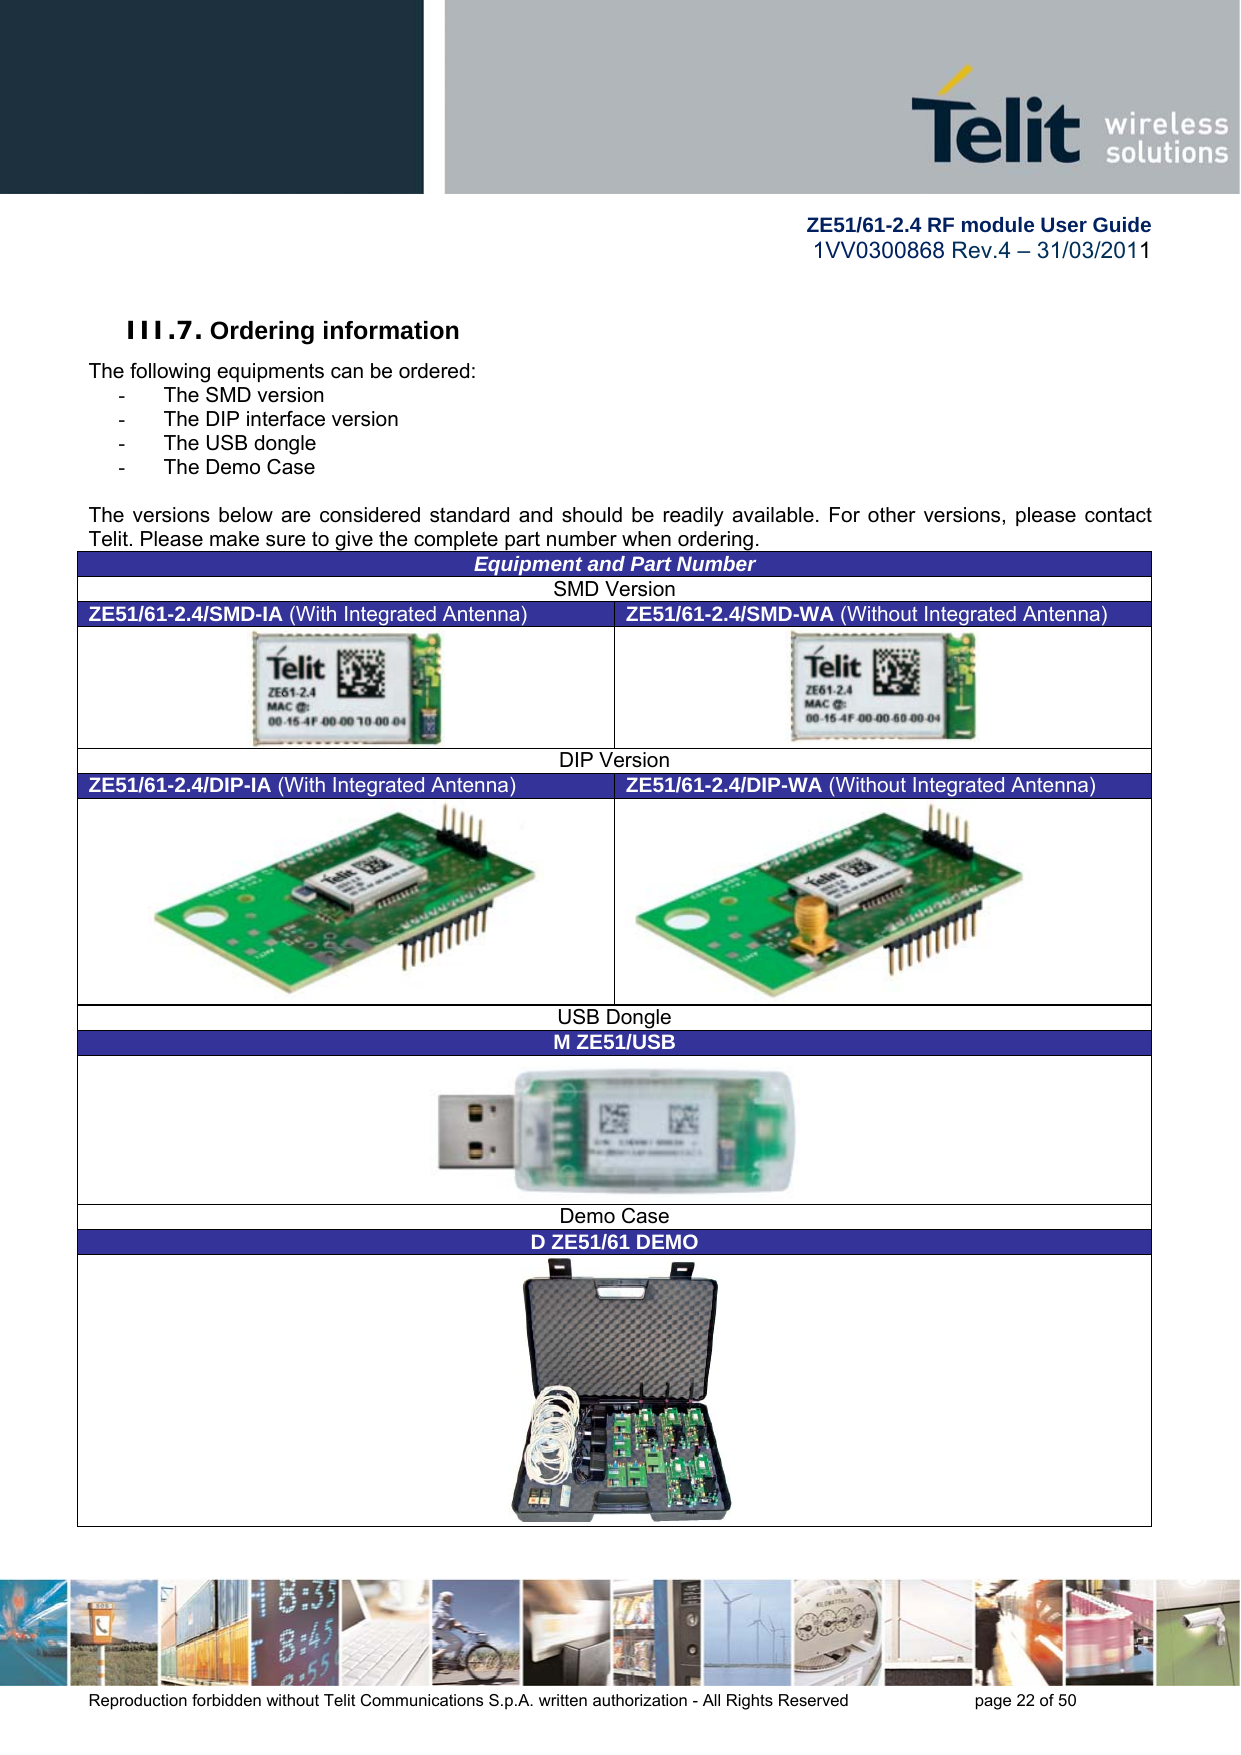         ZE51/61-2.4 RF module User Guide 1VV0300868 Rev.4 – 31/03/2011 Reproduction forbidden without Telit Communications S.p.A. written authorization - All Rights Reserved    page 22 of 50  III.7. Ordering information The following equipments can be ordered: -  The SMD version -  The DIP interface version -  The USB dongle  -  The Demo Case  The versions below are considered standard and should be readily available. For other versions, please contact Telit. Please make sure to give the complete part number when ordering. Equipment and Part NumberSMD Version ZE51/61-2.4/SMD-IA (With Integrated Antenna)  ZE51/61-2.4/SMD-WA (Without Integrated Antenna)   DIP Version ZE51/61-2.4/DIP-IA (With Integrated Antenna)  ZE51/61-2.4/DIP-WA (Without Integrated Antenna) USB Dongle M ZE51/USB Demo Case D ZE51/61 DEMO 